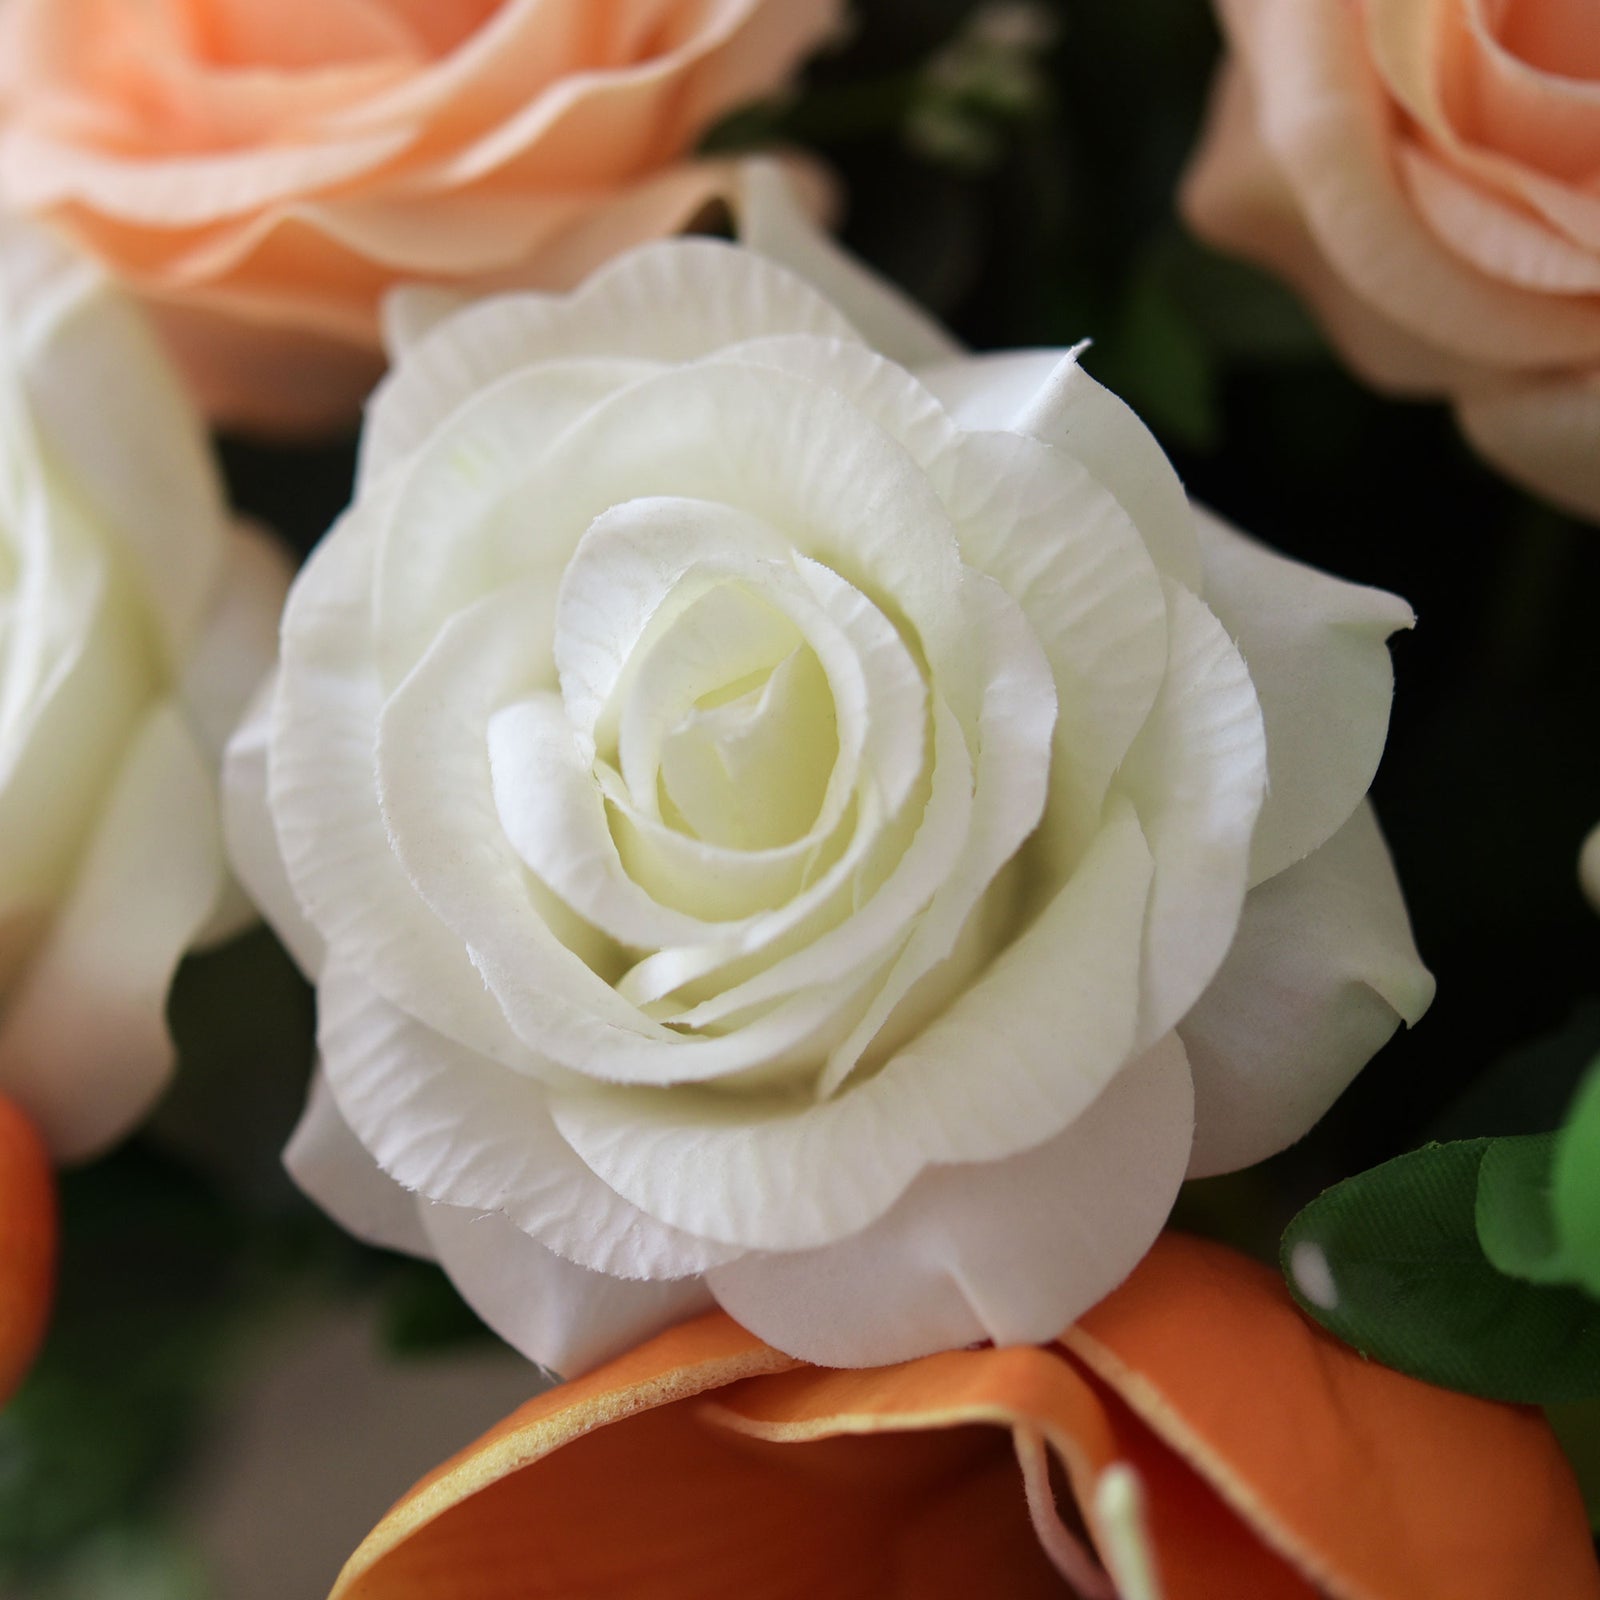 Artificial Flowers Real Touch Silk Roses 10 Stems (White)